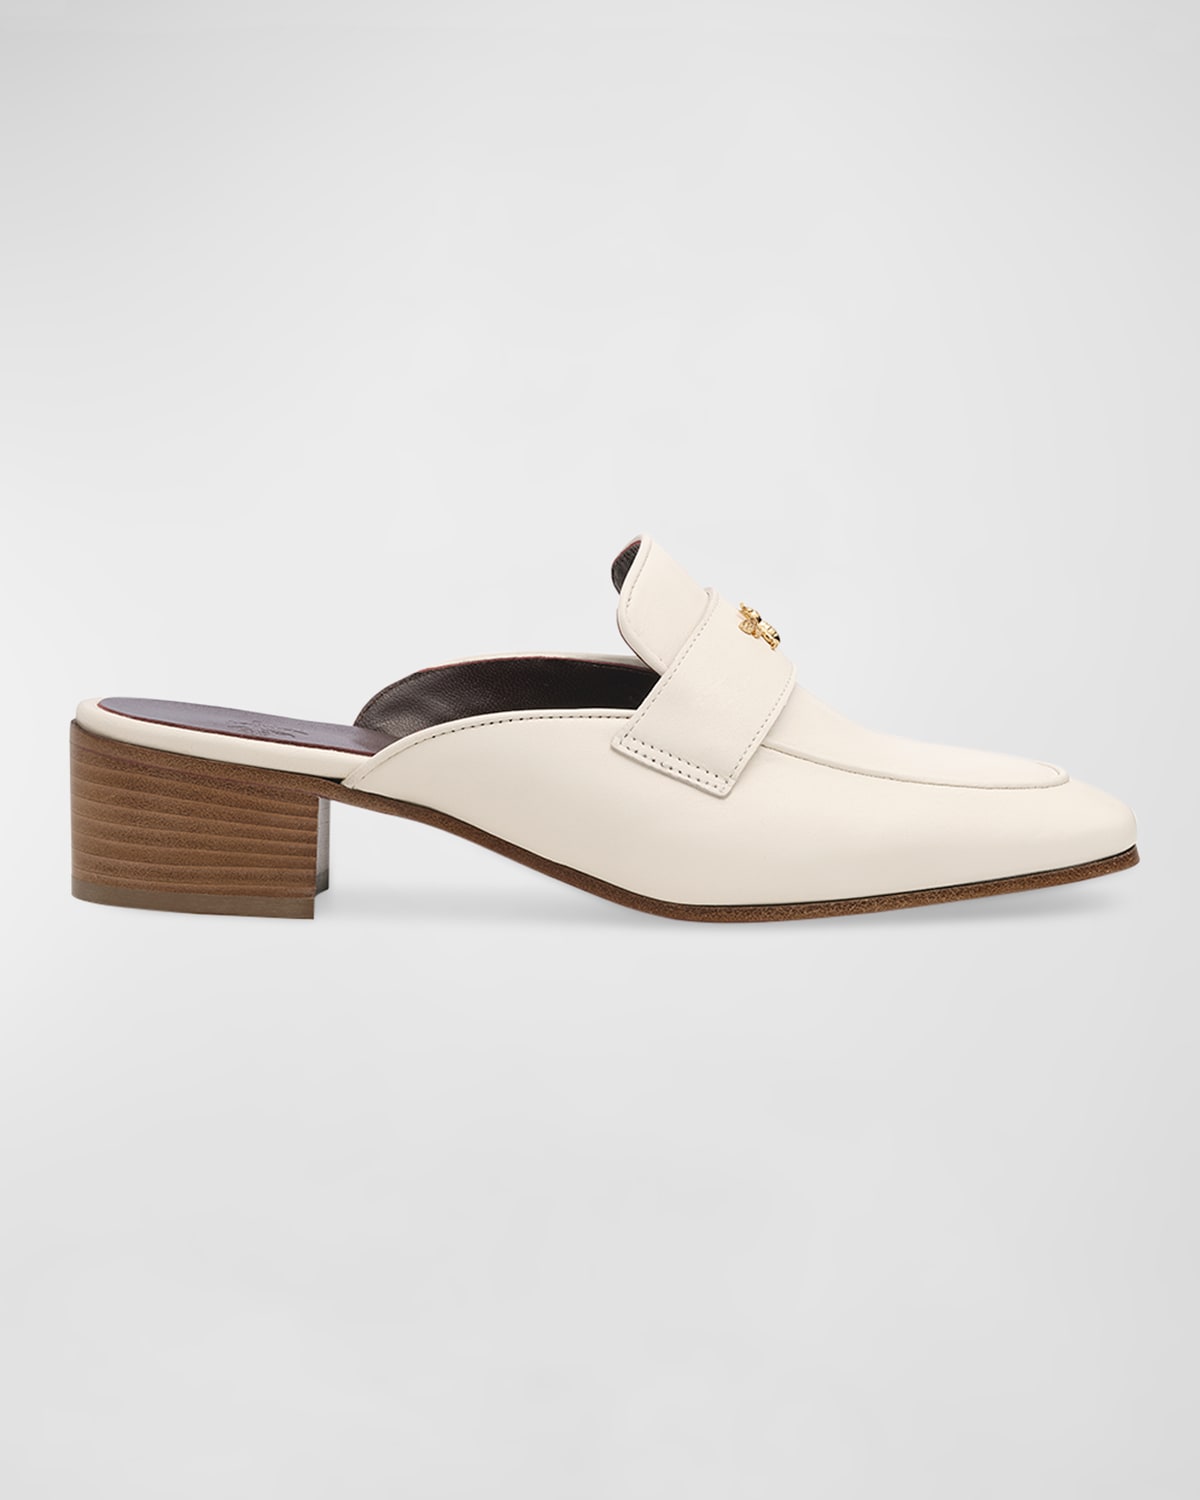 Leather Slided Loafer Mules